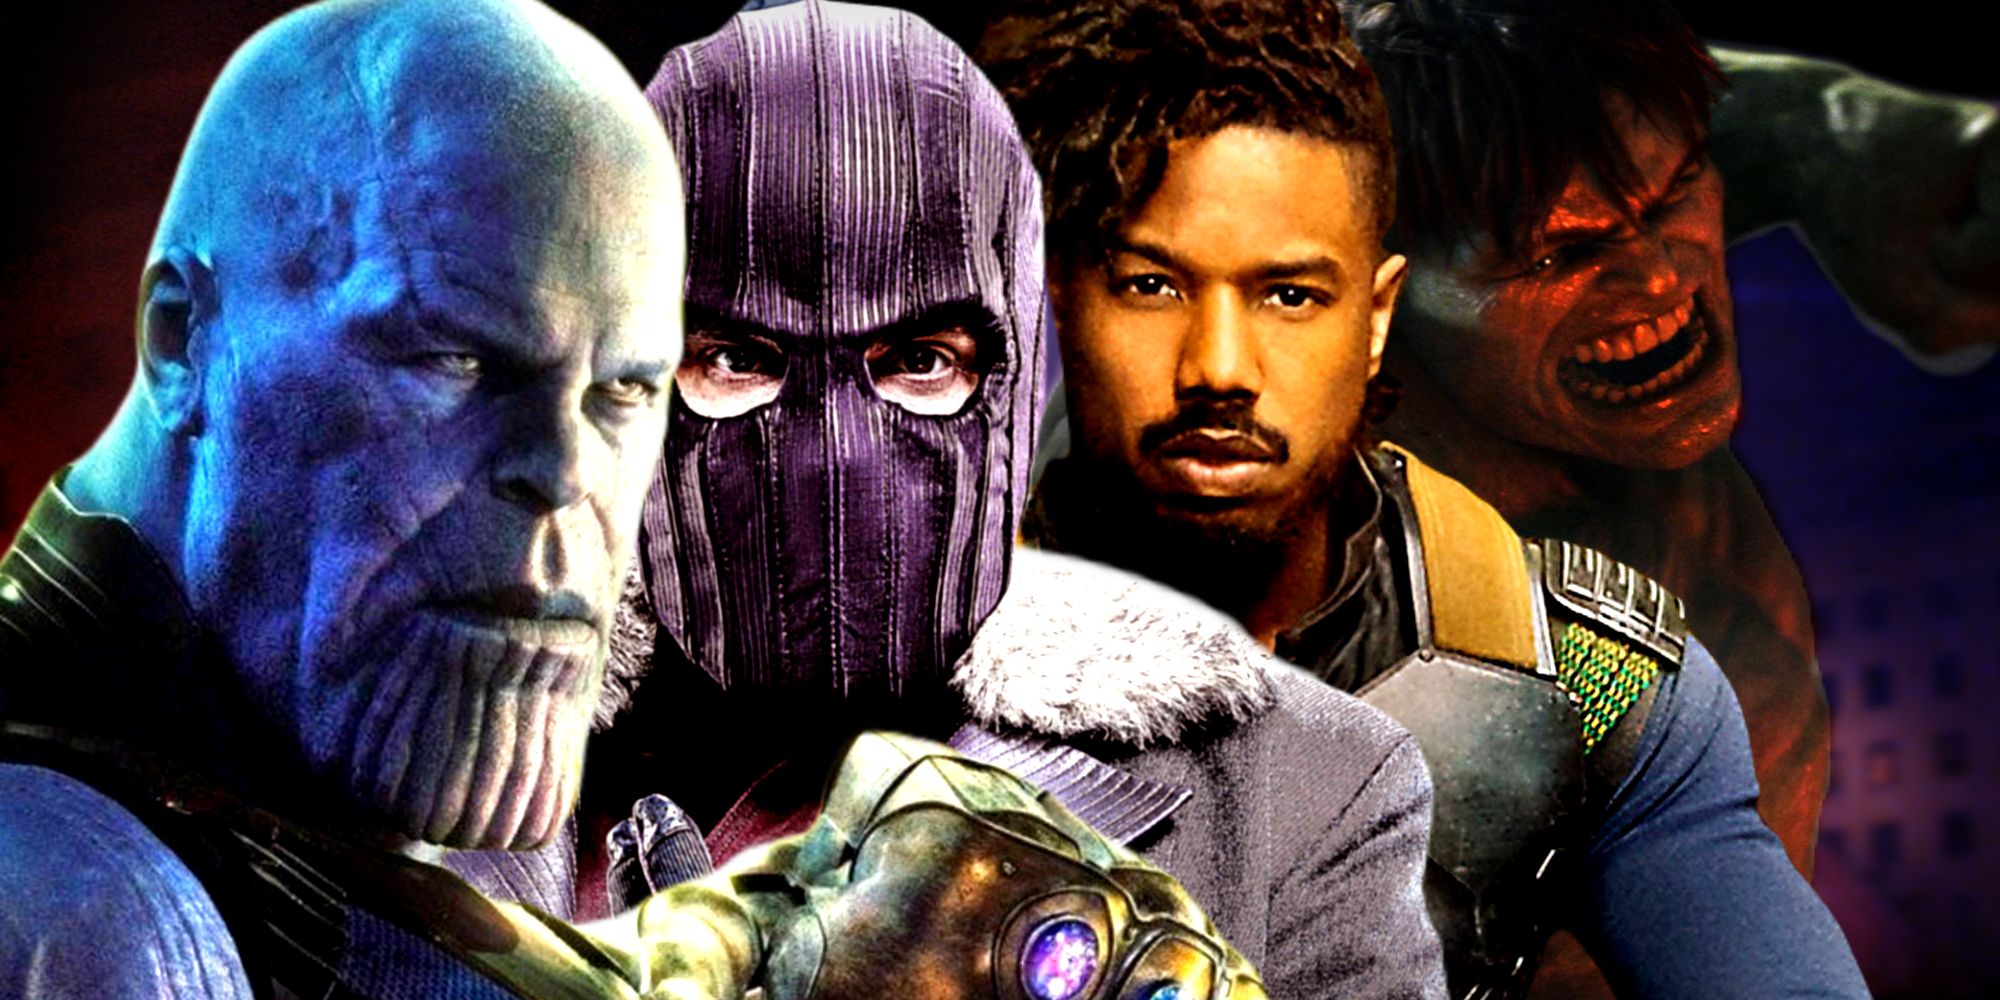 MCU Villains Thanos, Baron Zemo, and Eric Killmonger with The Incredible Hulk in the Background